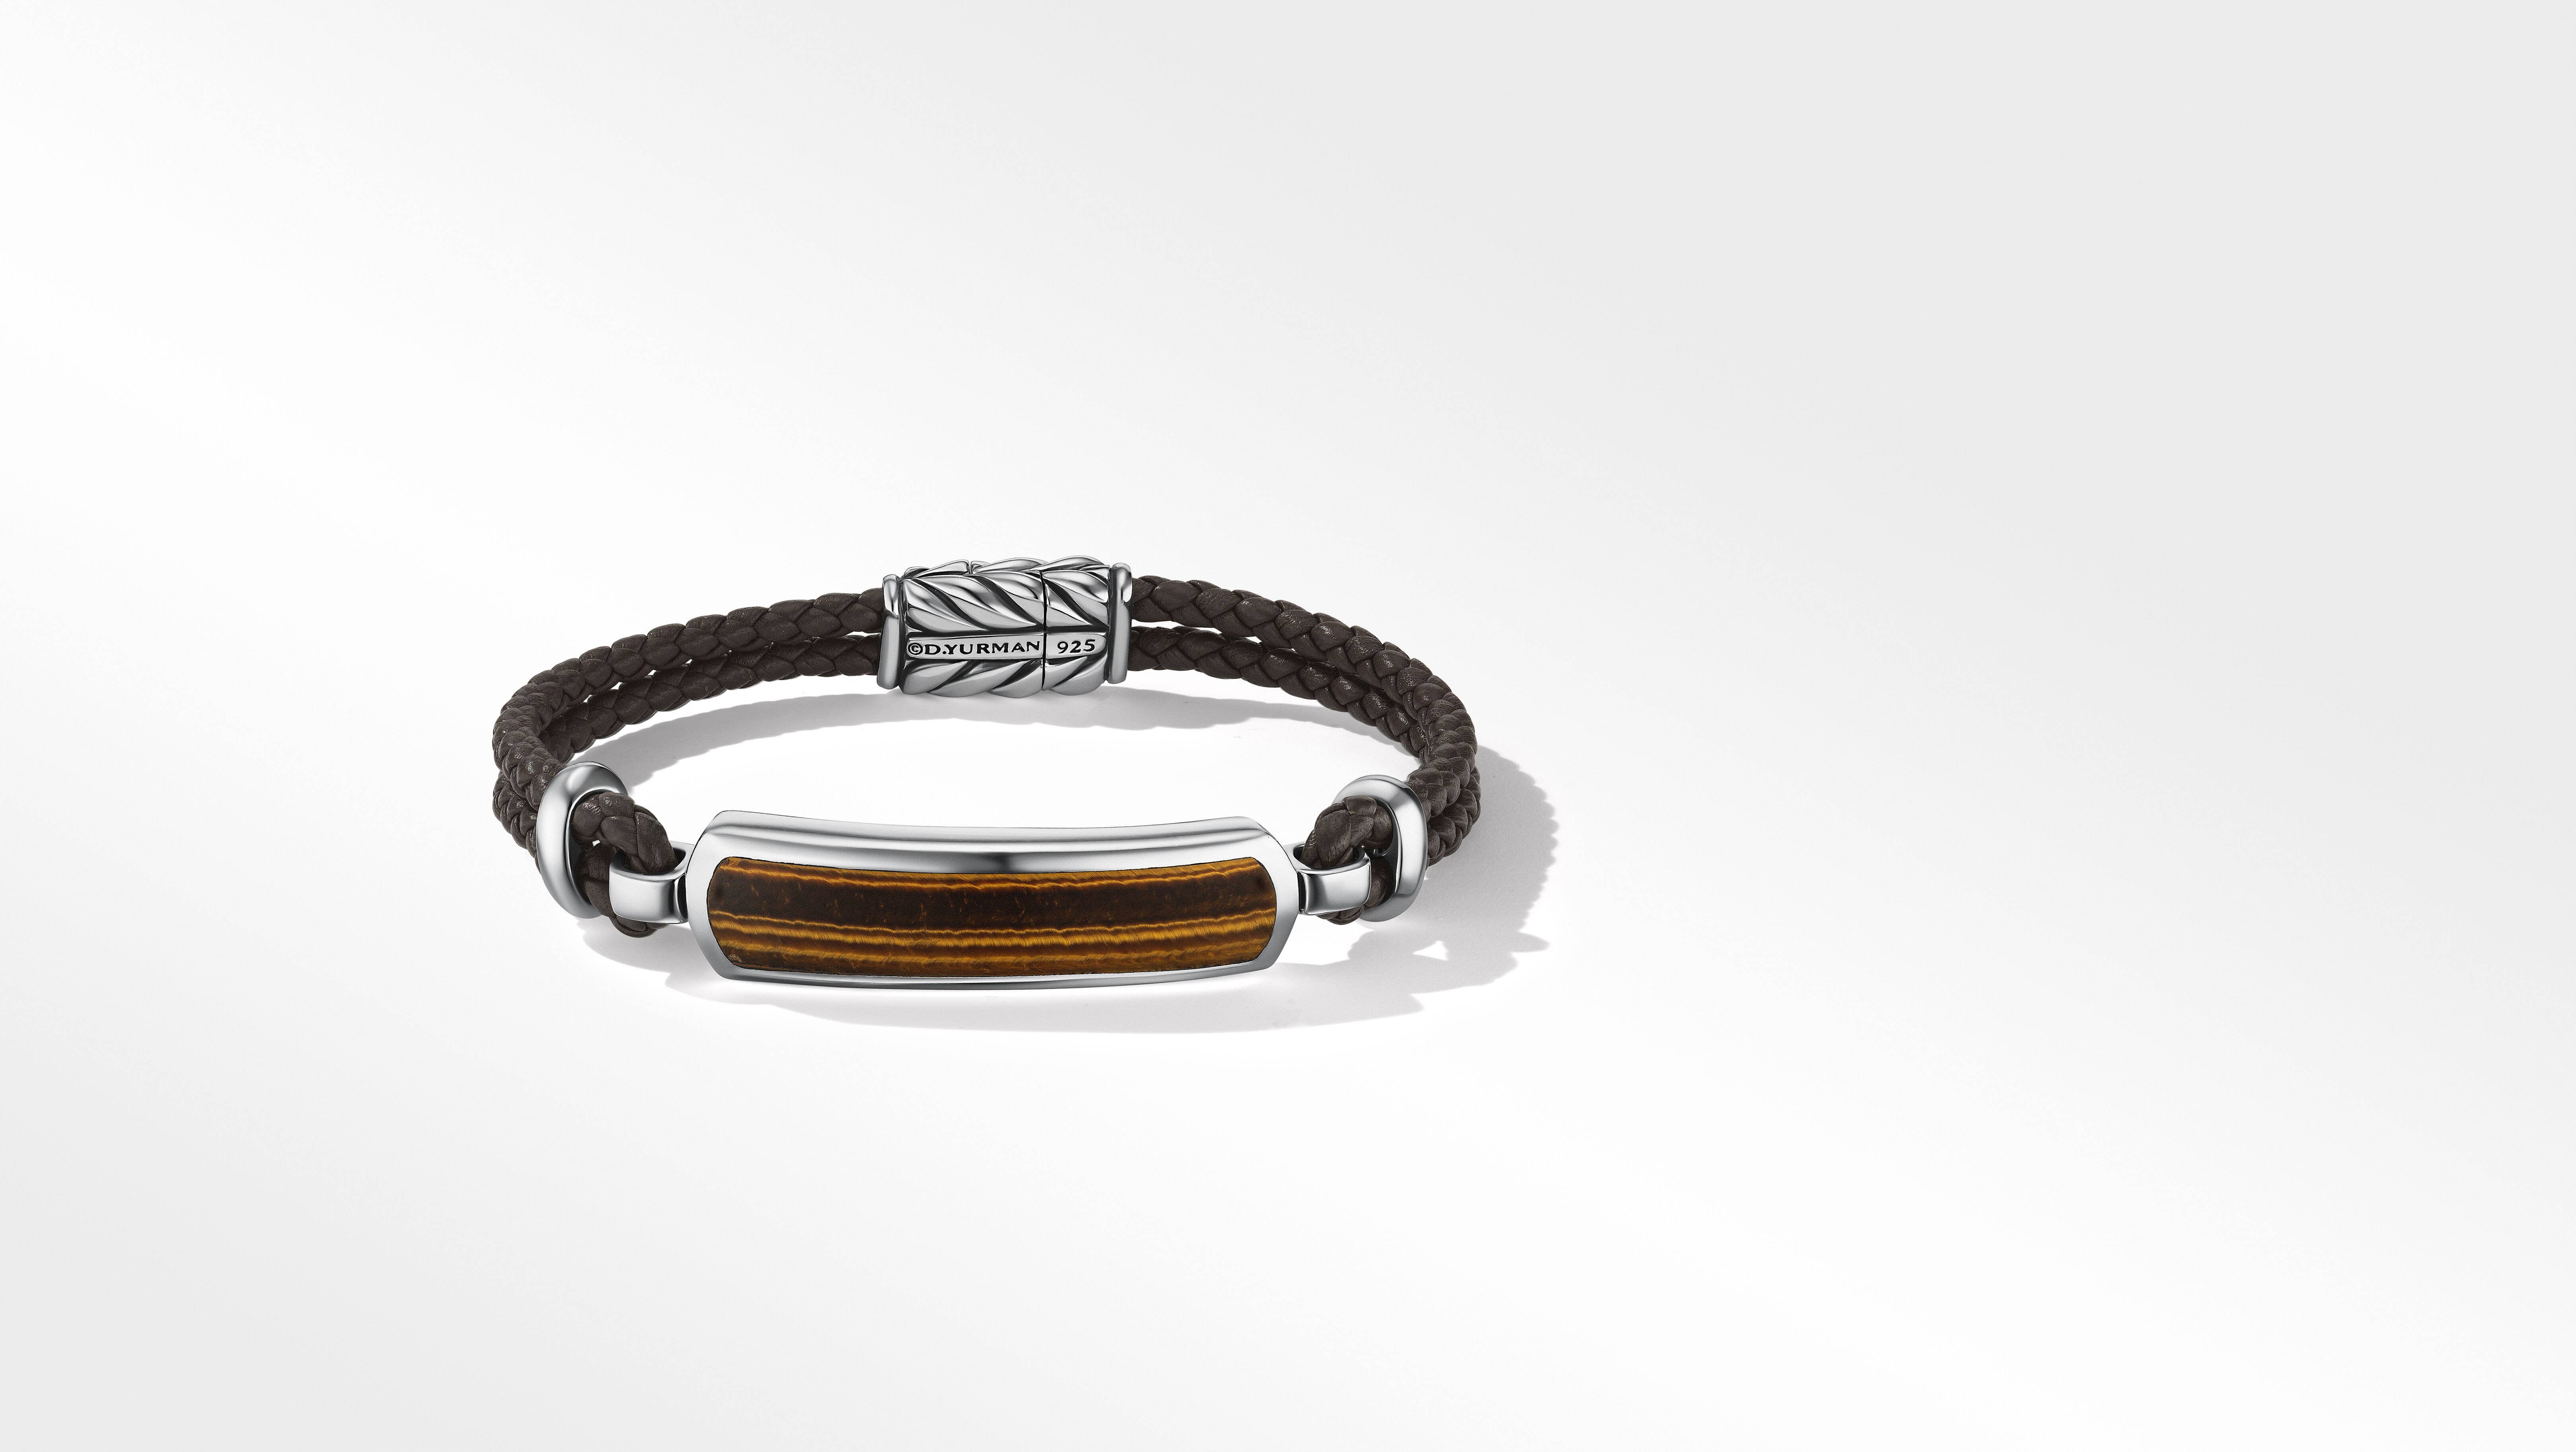 Yellow Chimes Men Black Leather Wraparound Bracelet Buy Yellow Chimes Men  Black Leather Wraparound Bracelet Online at Best Price in India  Nykaa